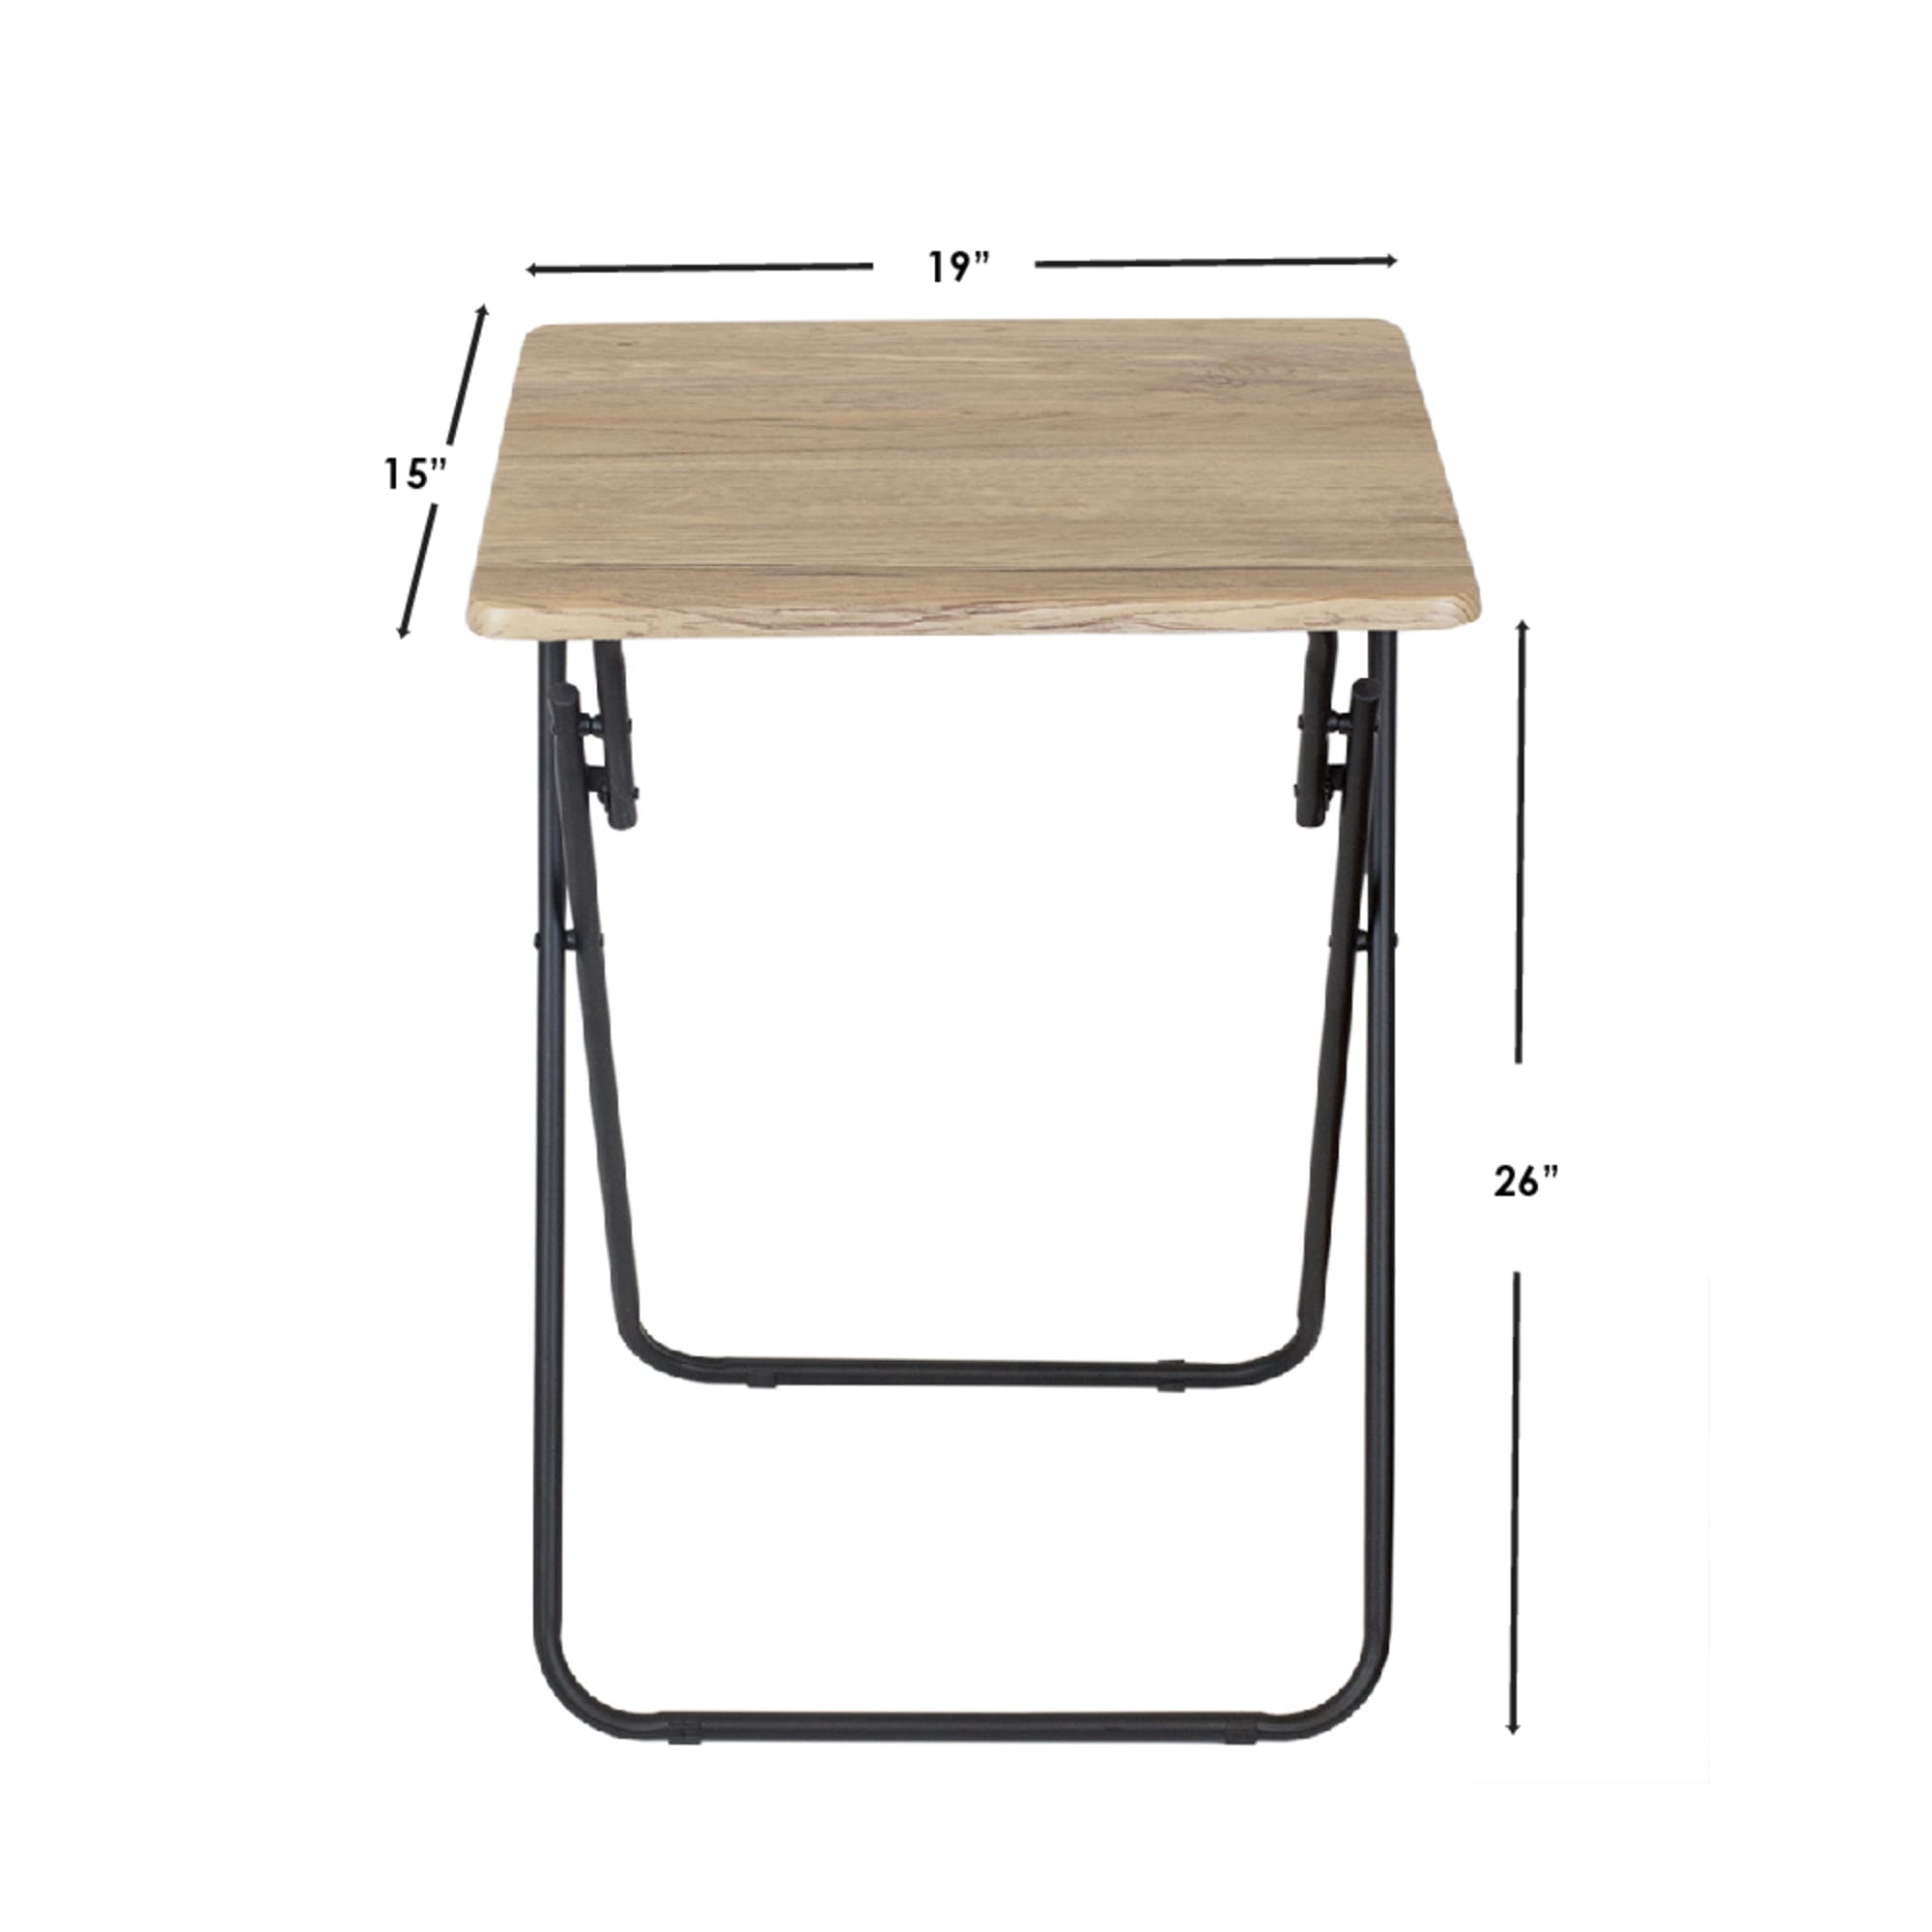 Home Basics Multi-Purpose Foldable Table, Natural $15.00 EACH, CASE PACK OF 6